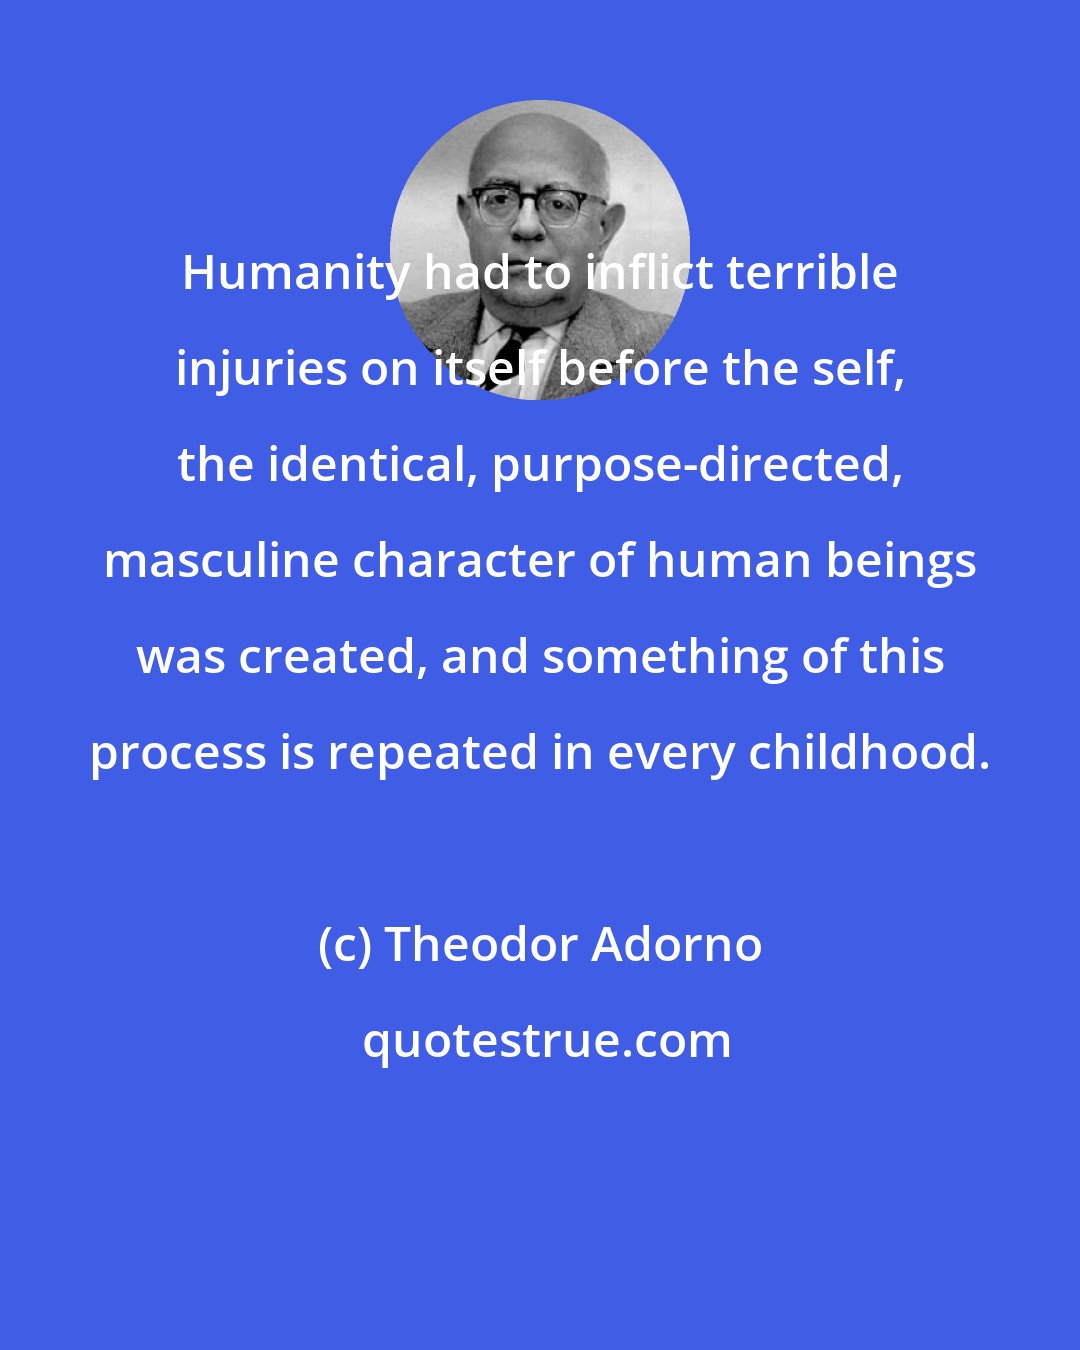 Theodor Adorno: Humanity had to inflict terrible injuries on itself before the self, the identical, purpose-directed, masculine character of human beings was created, and something of this process is repeated in every childhood.